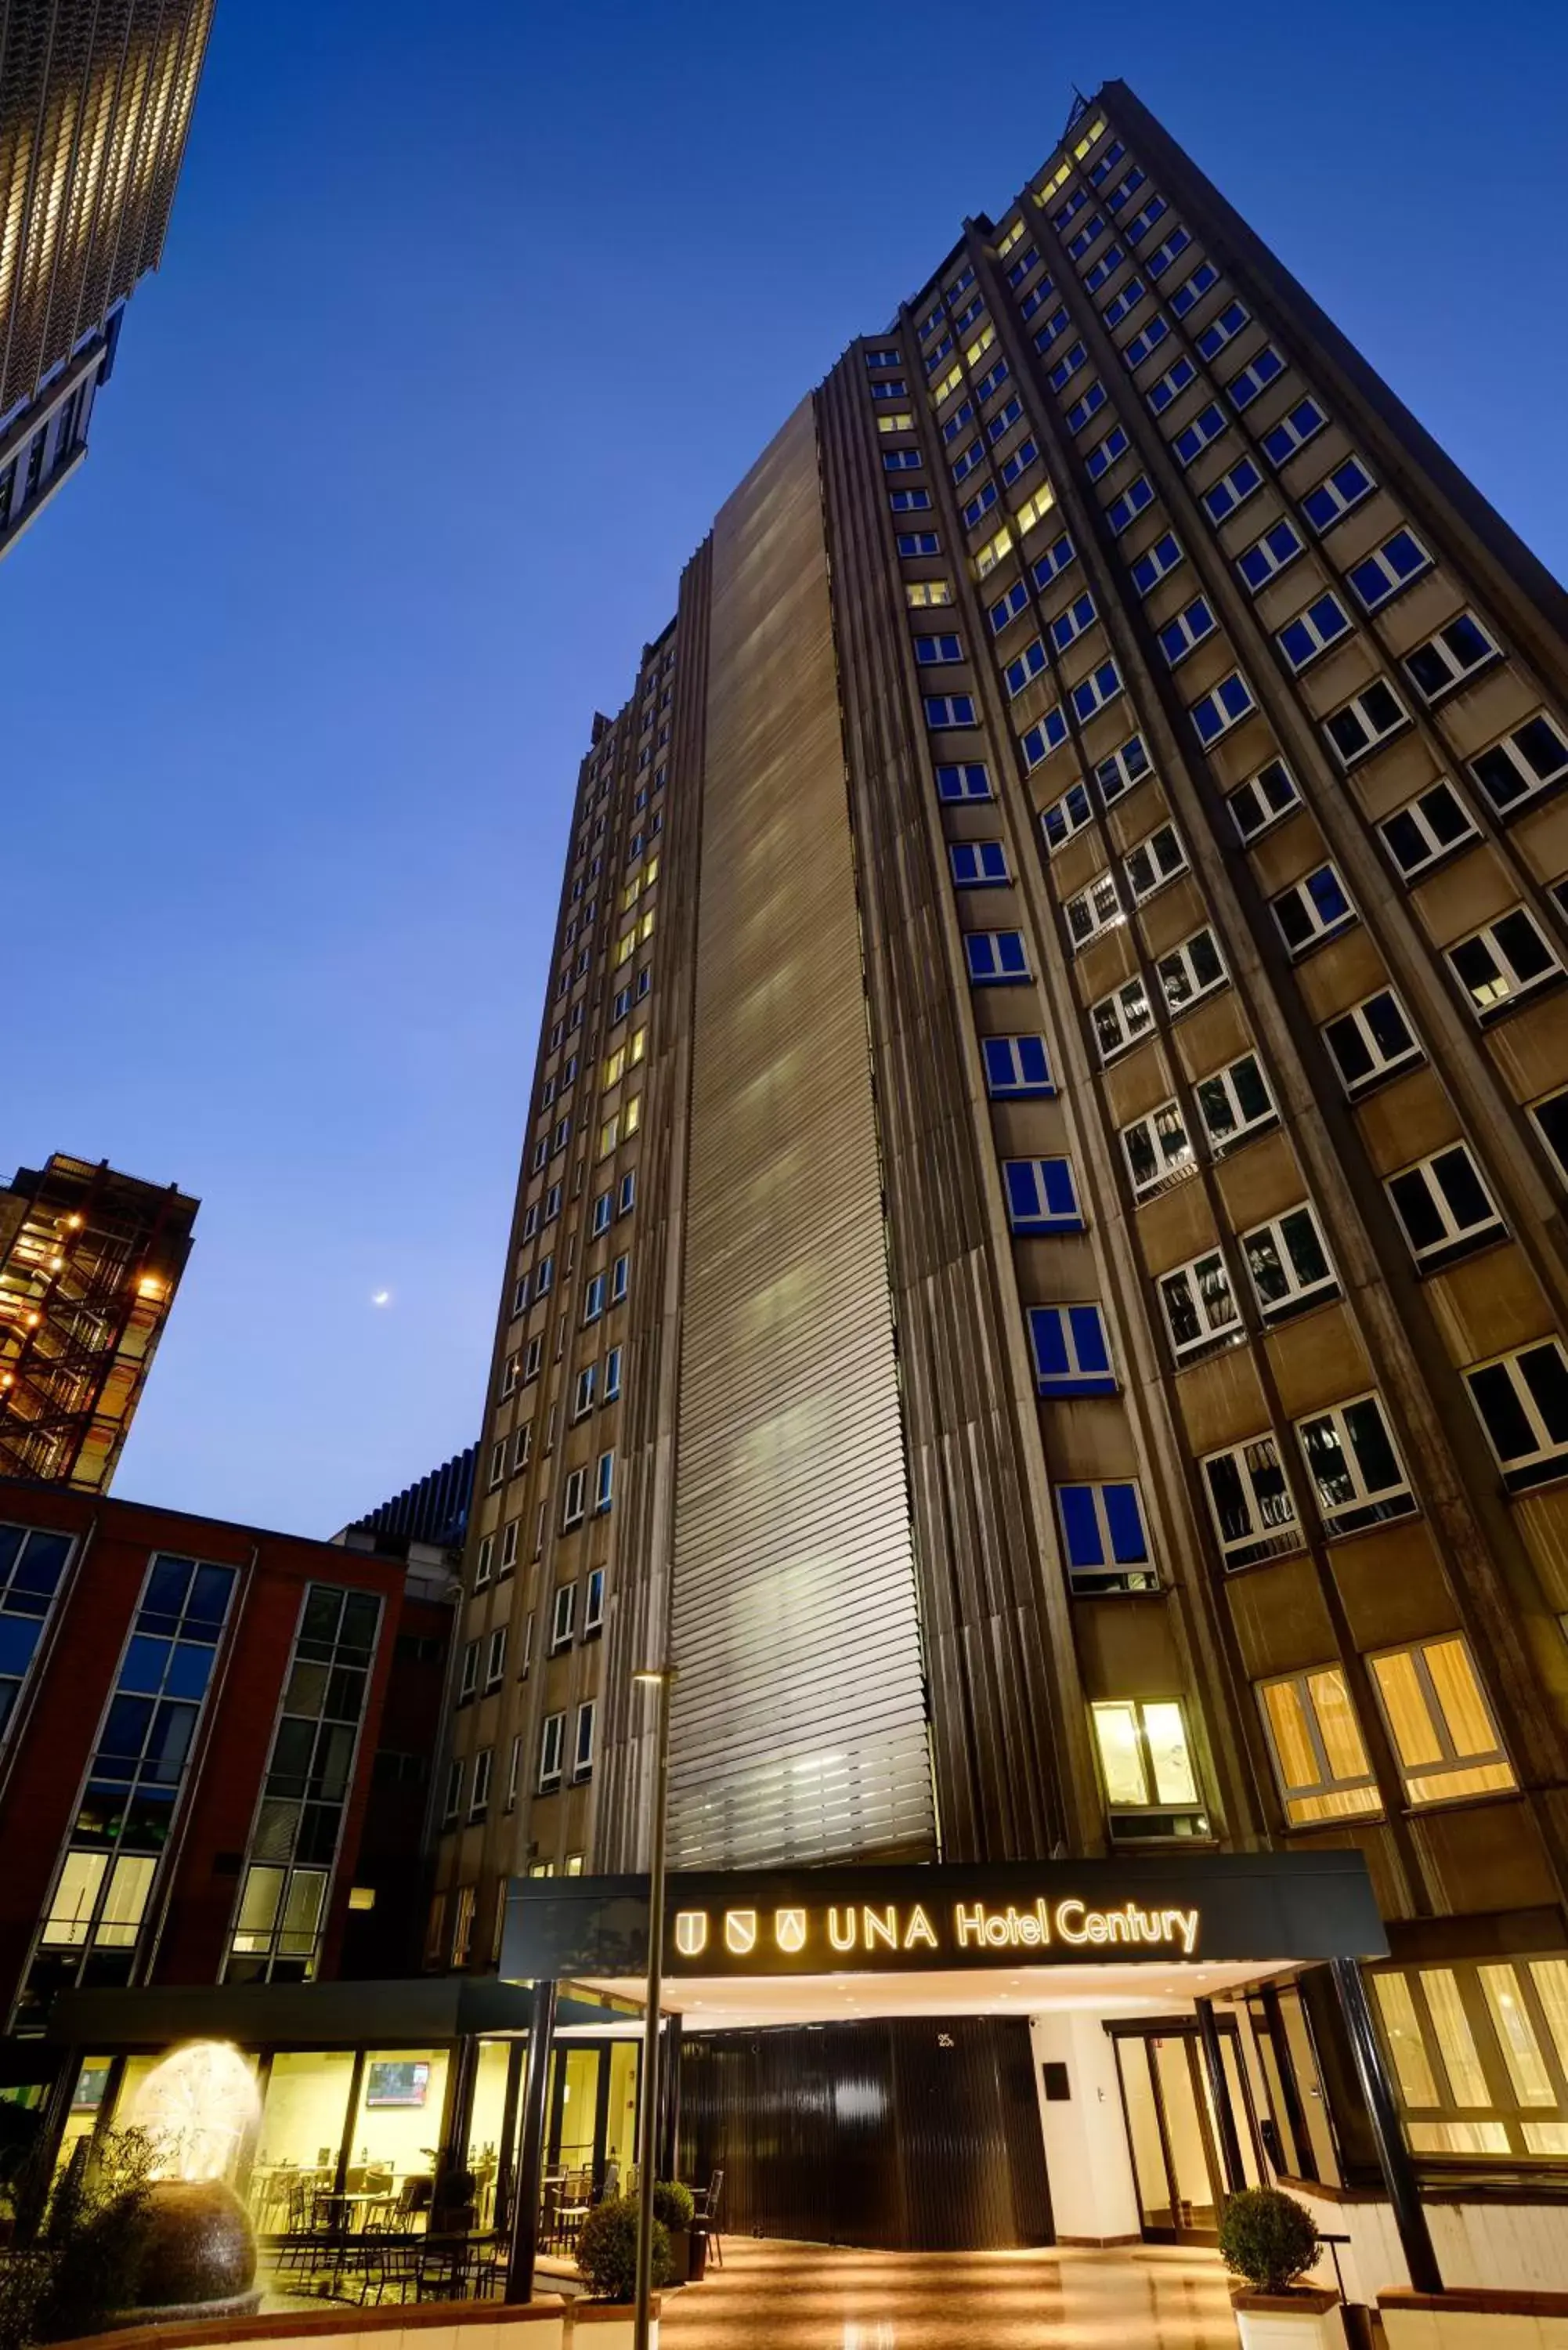 Property Building in UNAHOTELS Century Milano